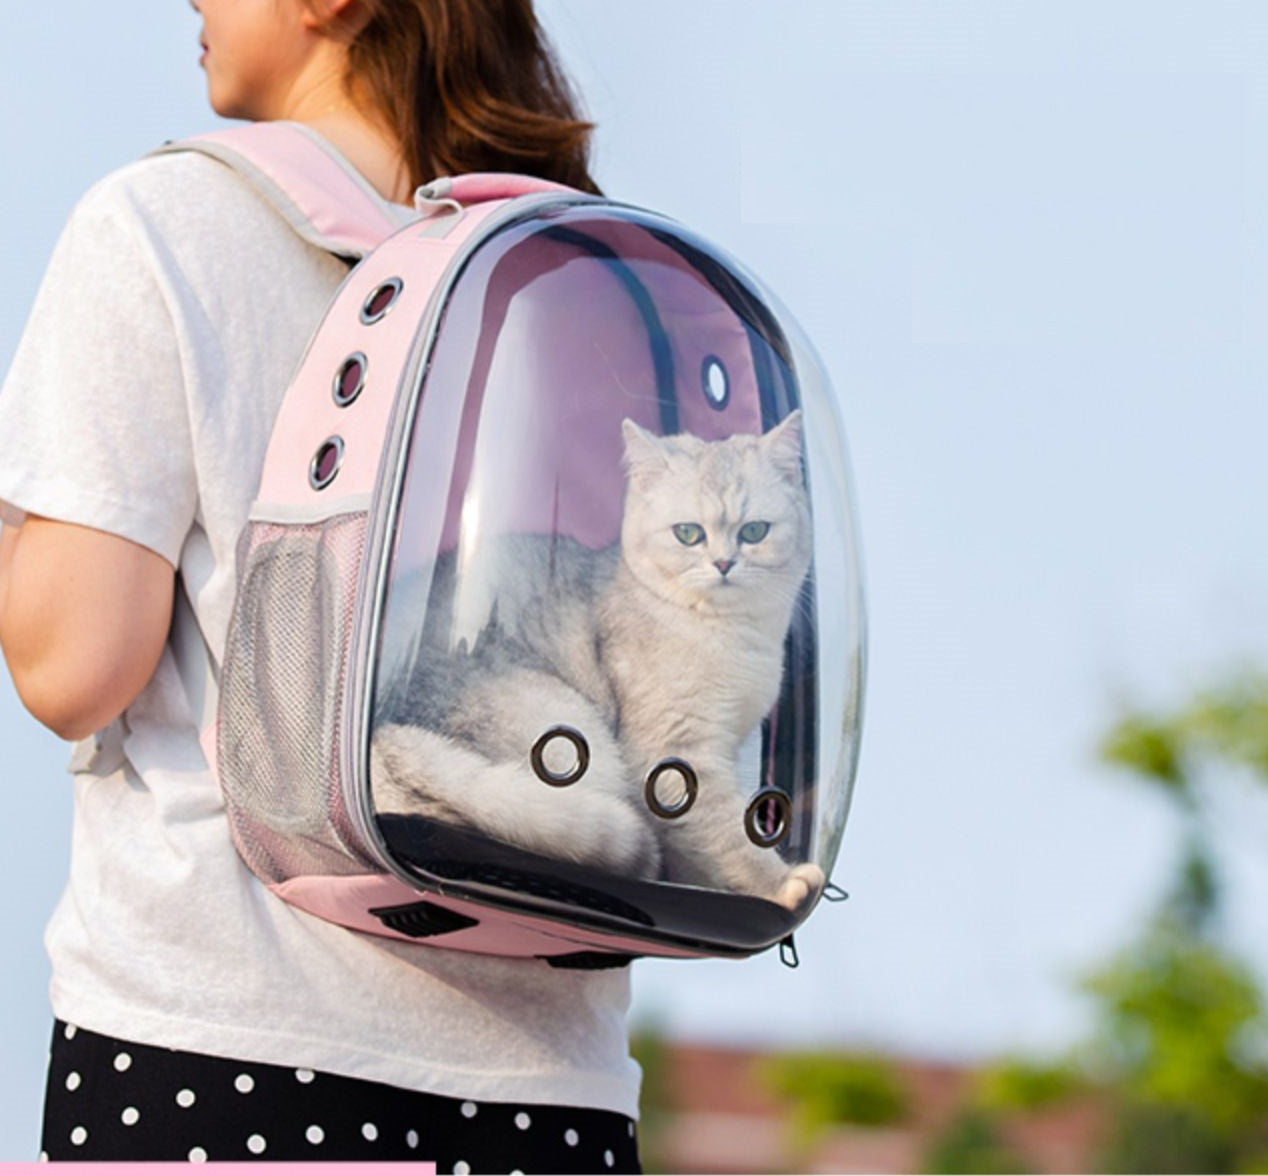 Green Cat & Dog bag was exposed pet bag dog out portable space capsule transparent backpack 4160